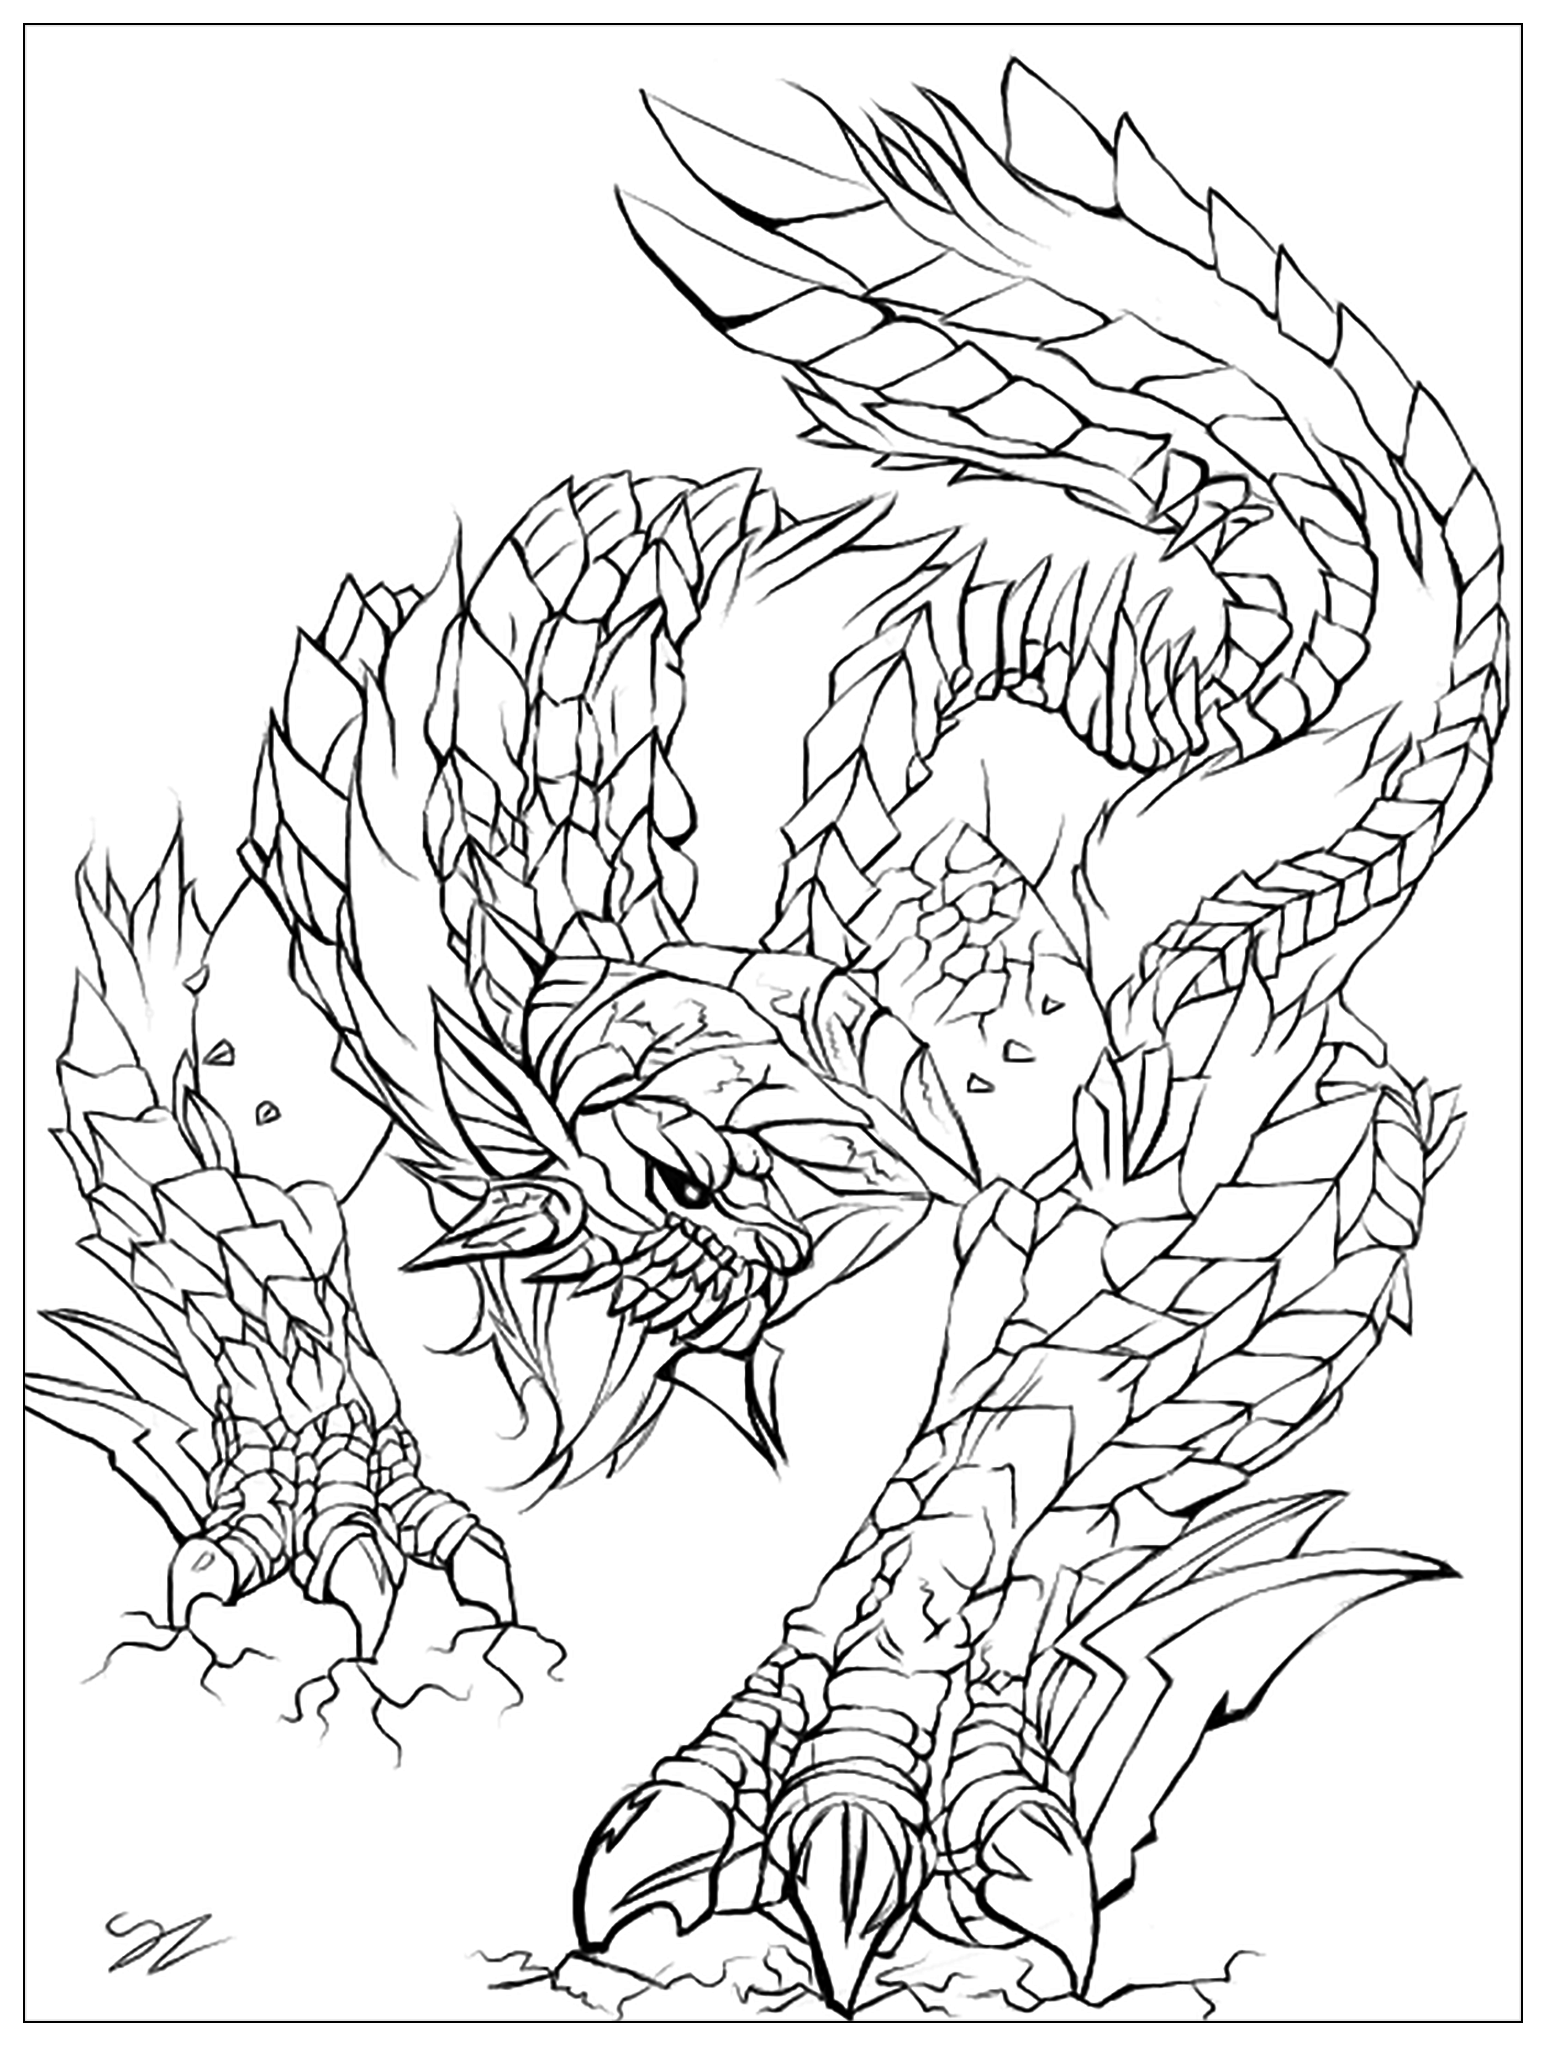 Monster By Juline Valentin Adult Coloring Pages